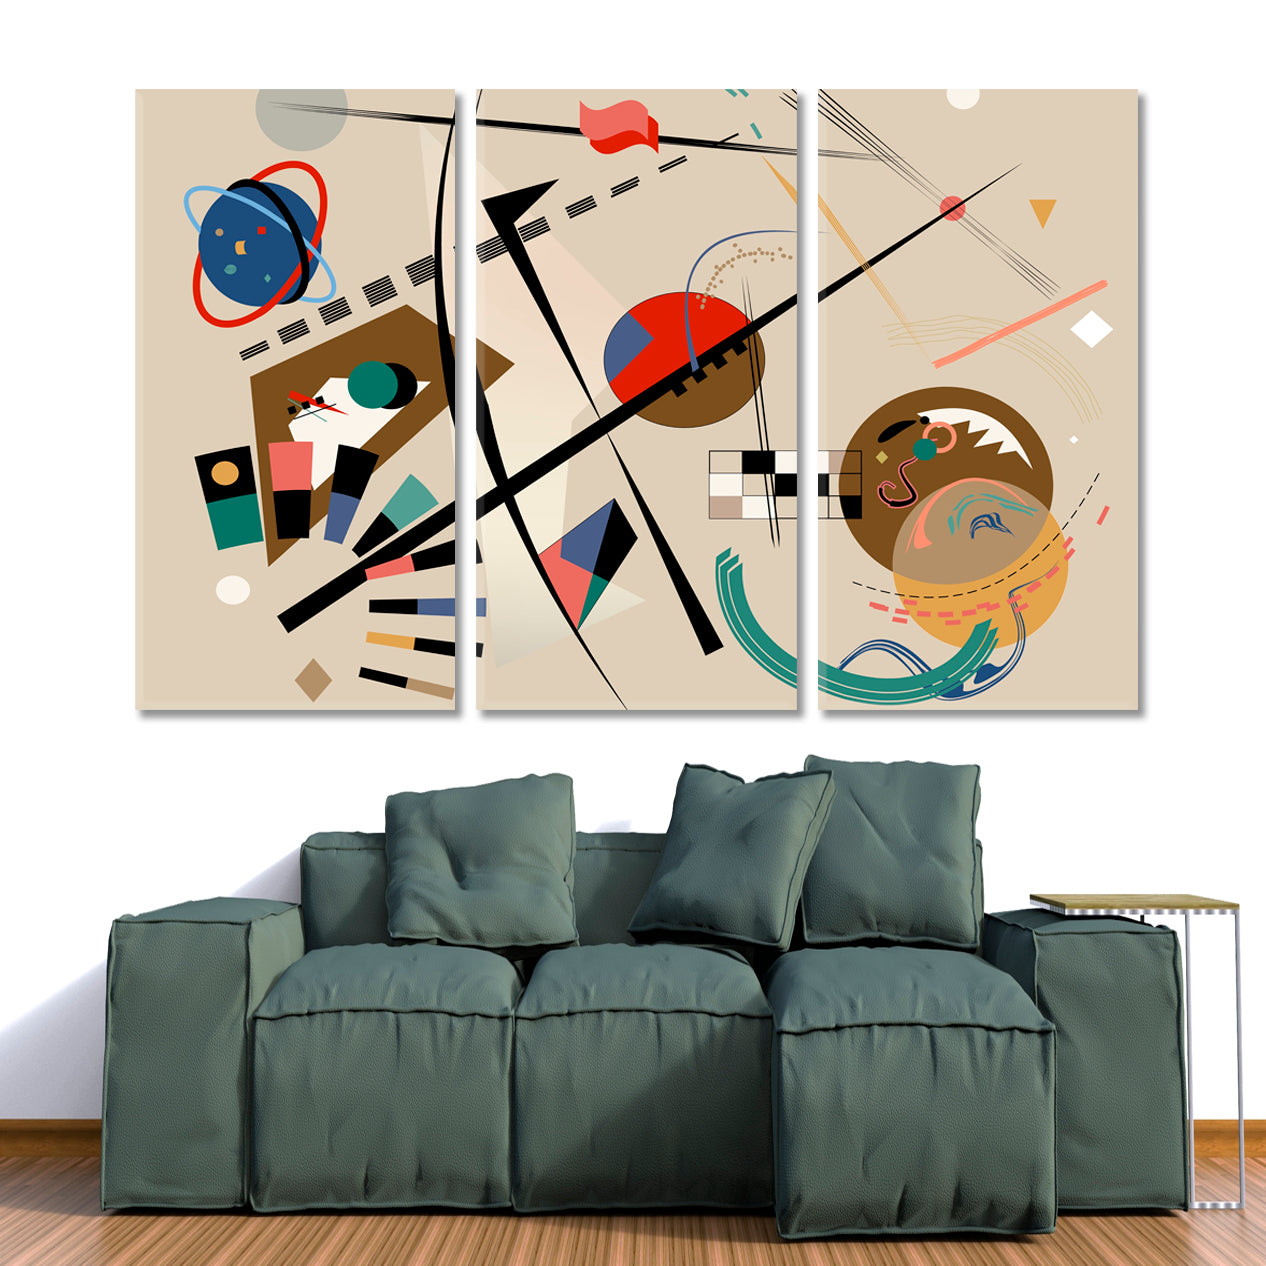 Geometric Curved Shapes Expressionism Abstract Style Contemporary Art Artesty 3 panels 36" x 24" 